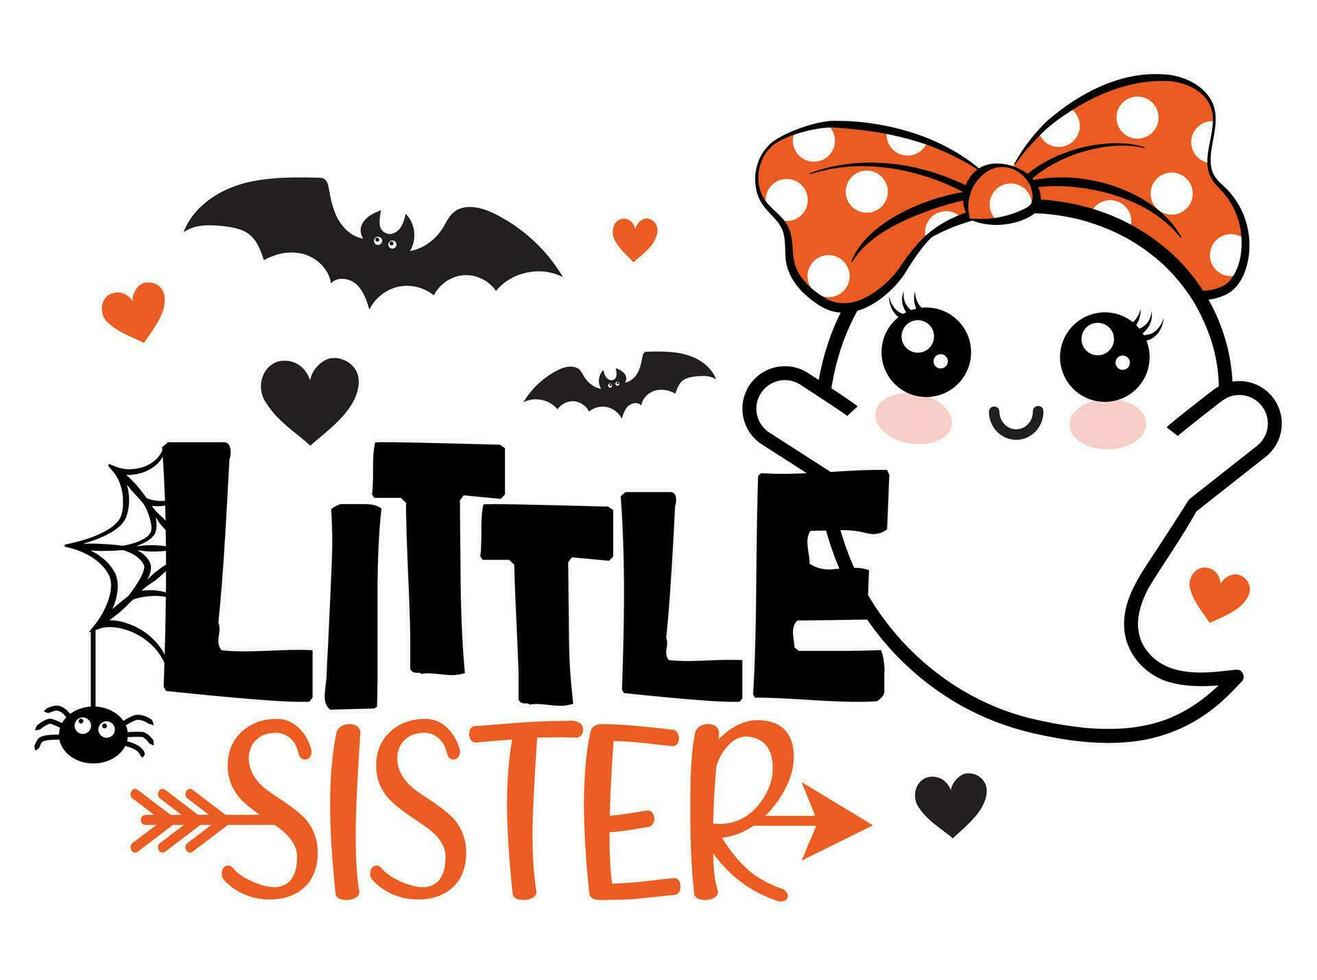 Little Sister Halloween vector illustration with cute ghost, hearts, spider and bats. Girls Halloween design isolated.